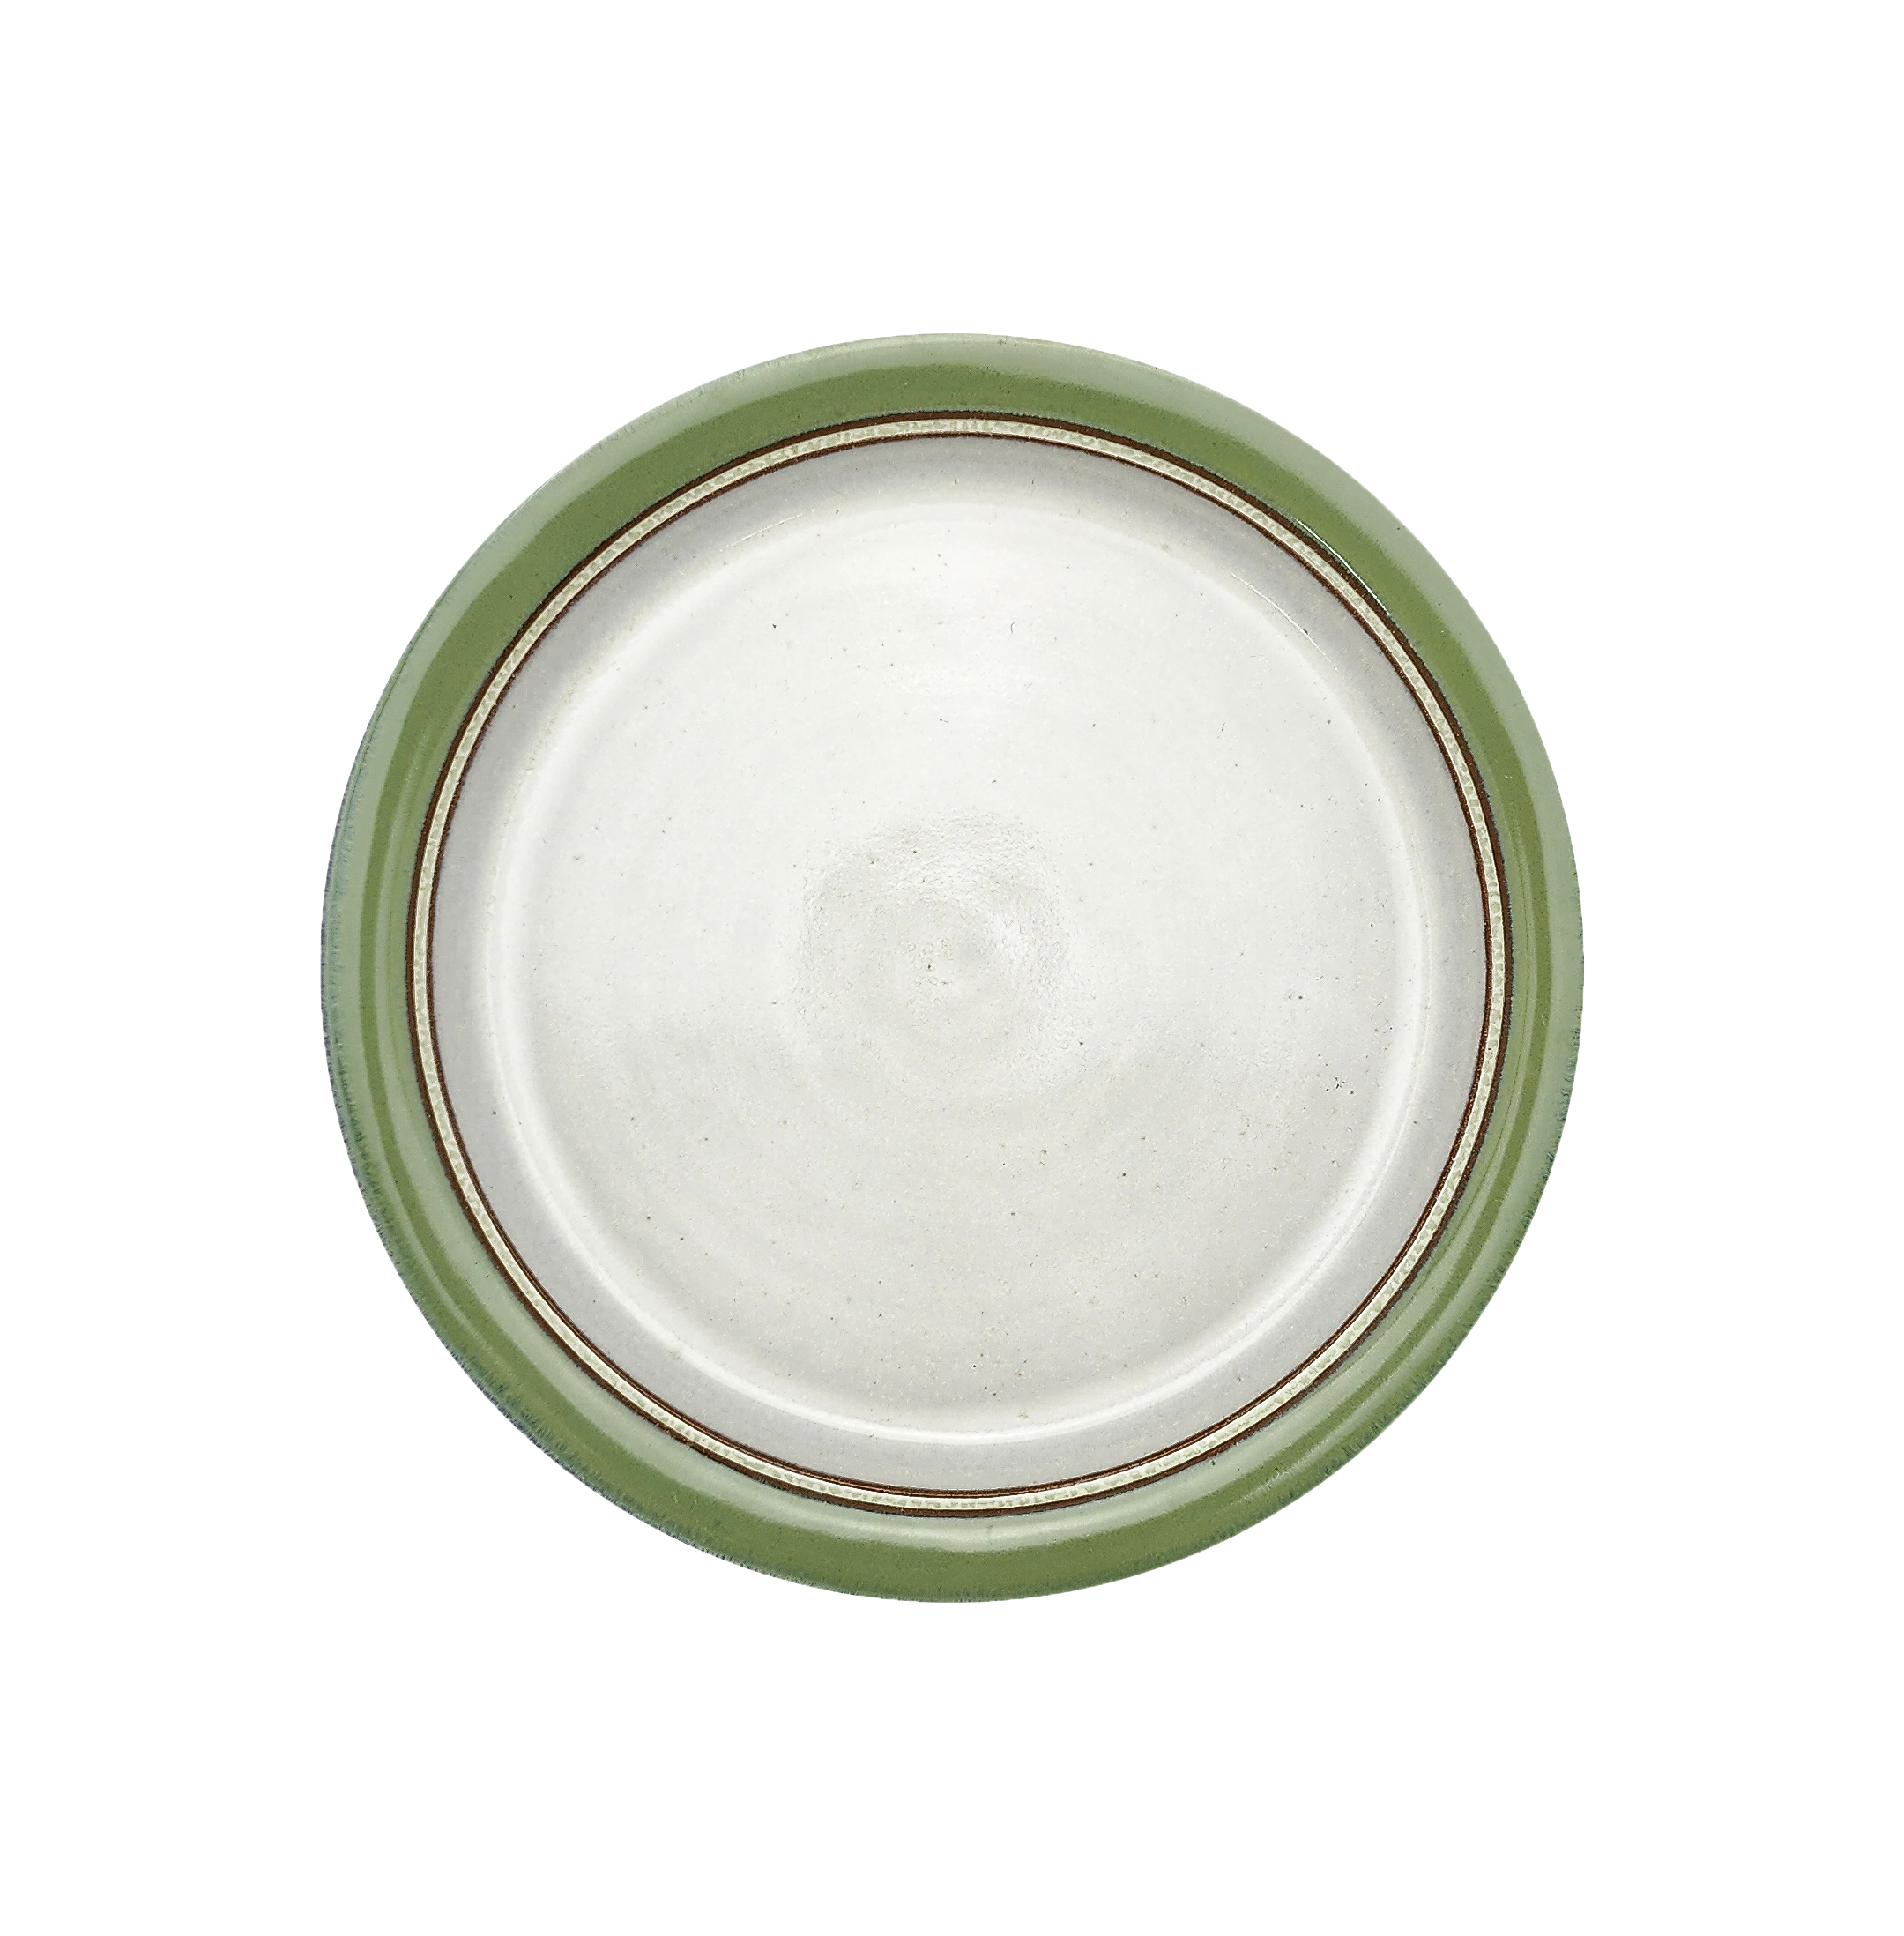 Image Description for  Dinner Plate (10") in Bud Green: A charming bud green dinner plate from Clinton Pottery's Handmade Dinnerware Collection. The 10-inch plate features a delightful green glaze, reminiscent of fresh spring foliage. Its ample size makes it an ideal choice for serving a delightful dinner with a touch of natural charm and vibrancy.